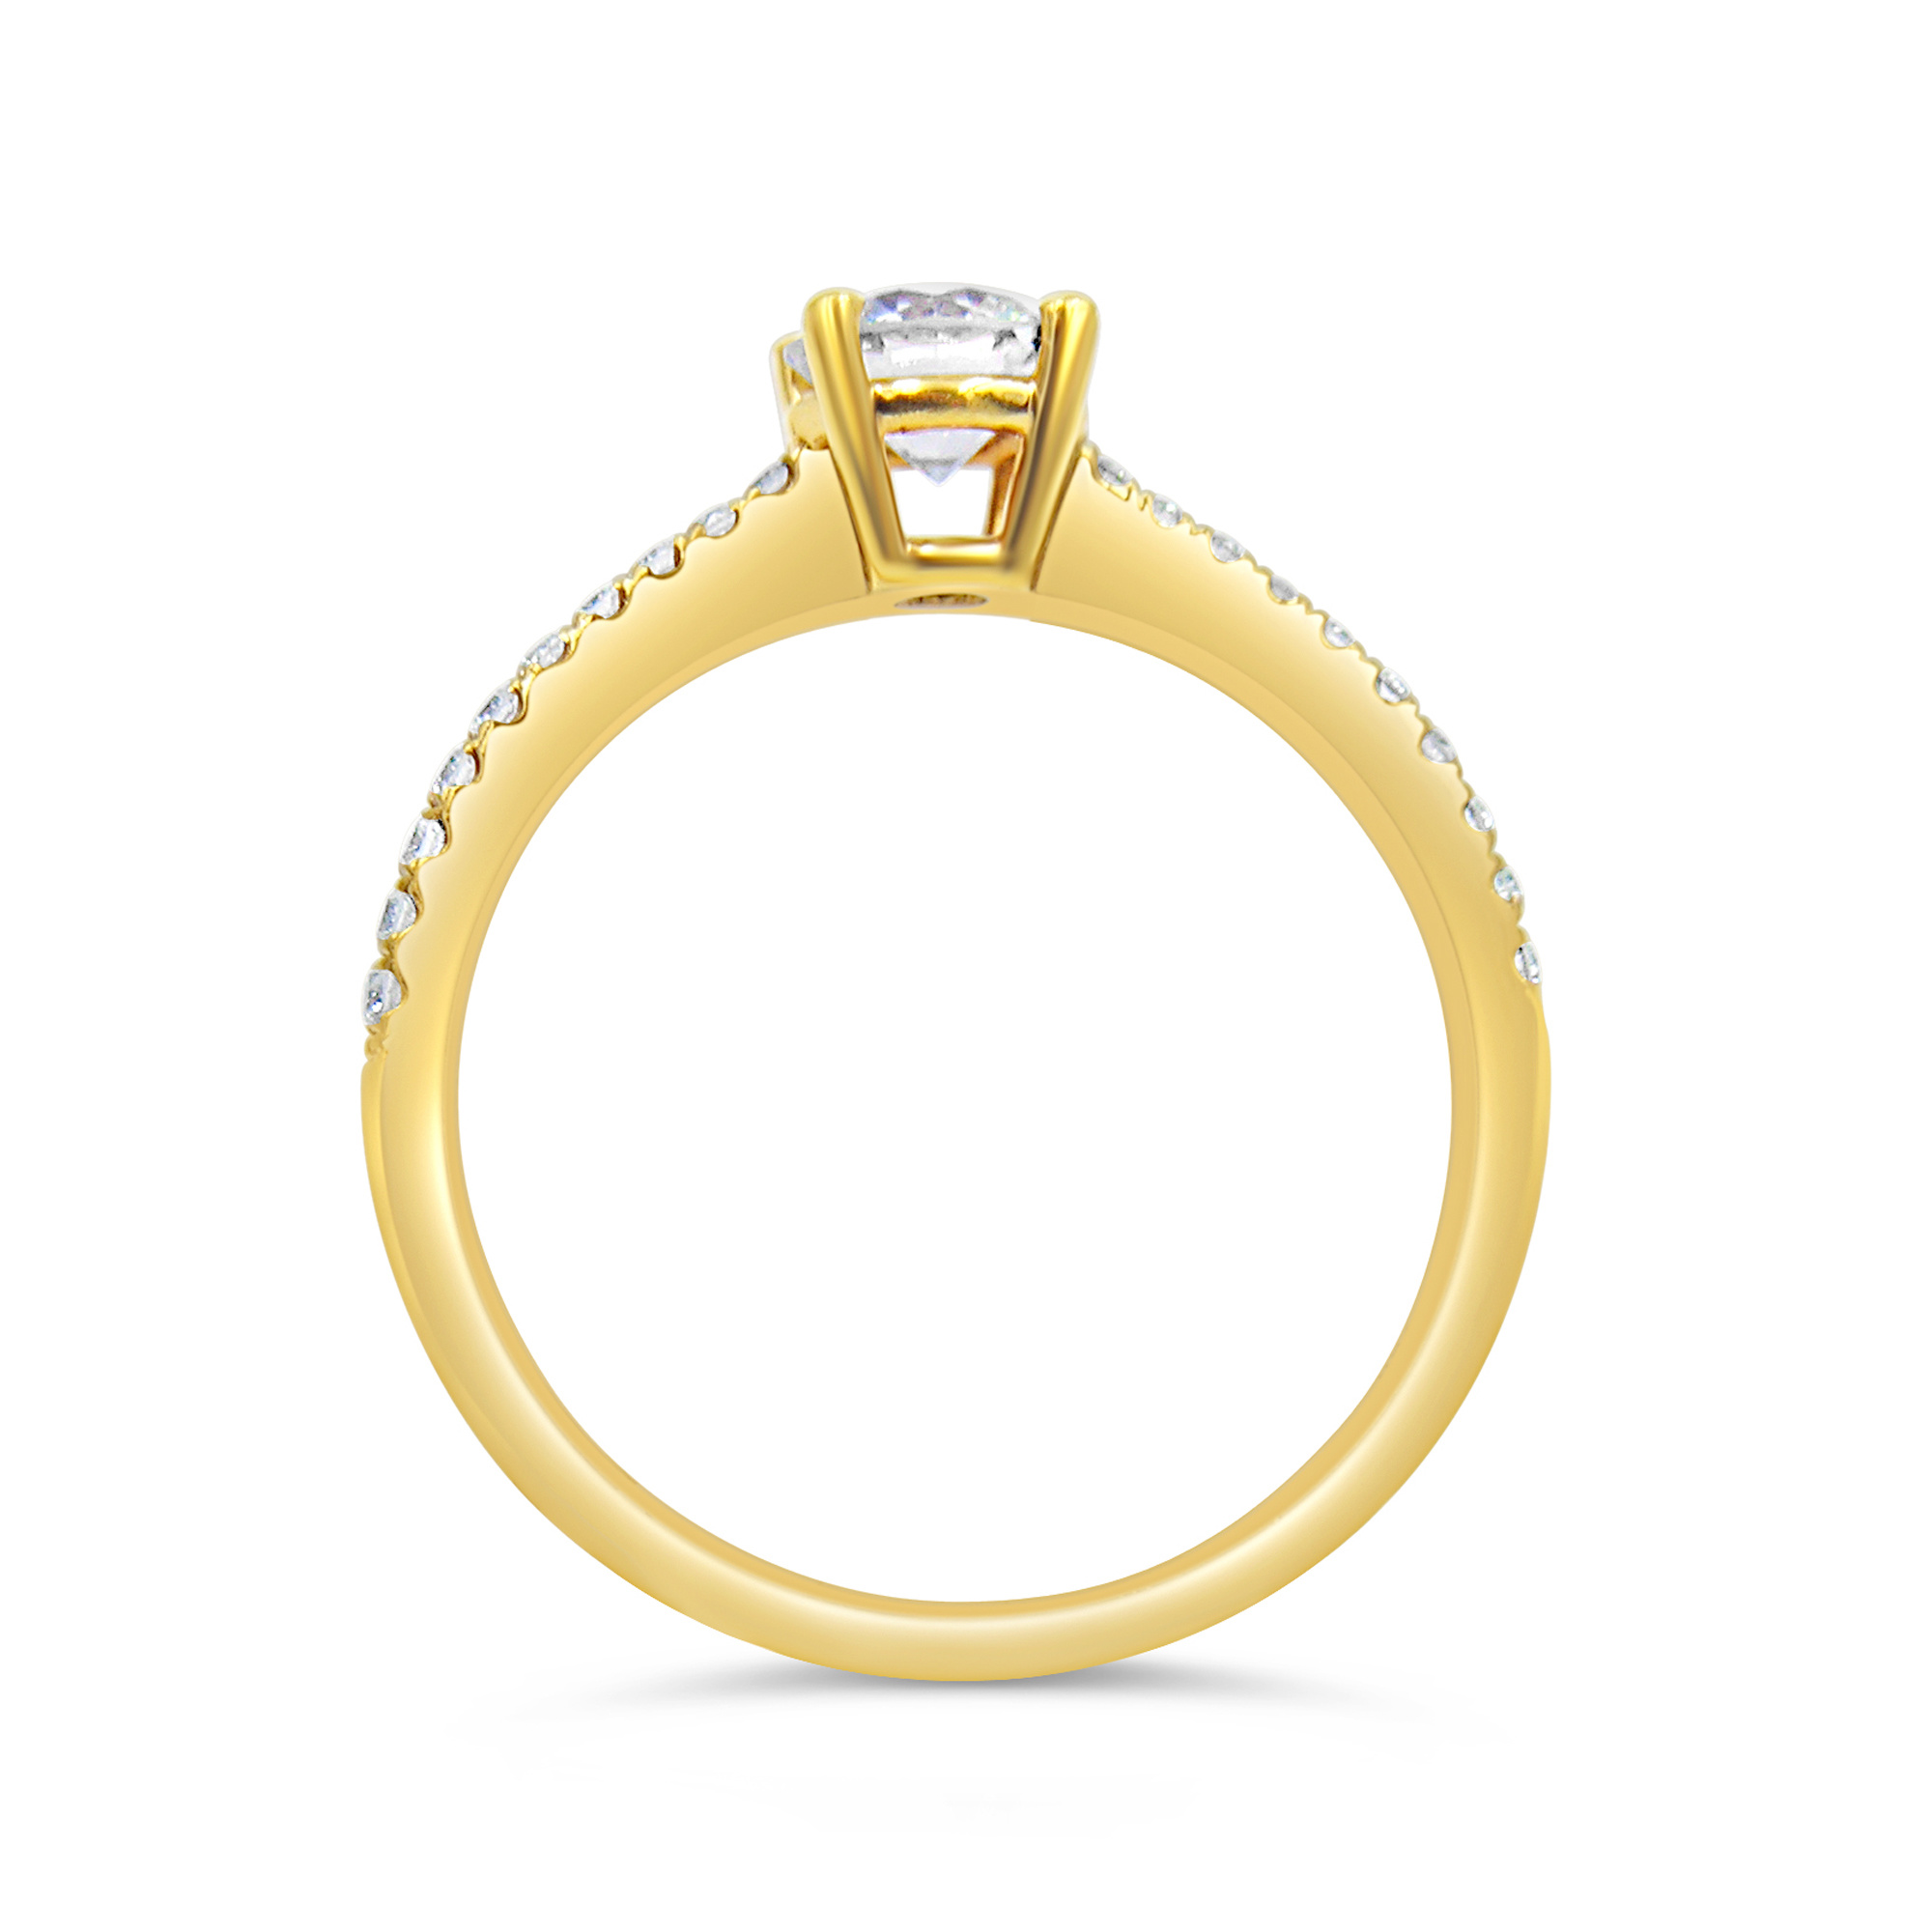 18kt yellow gold engagement ring with 0.80 ct diamonds